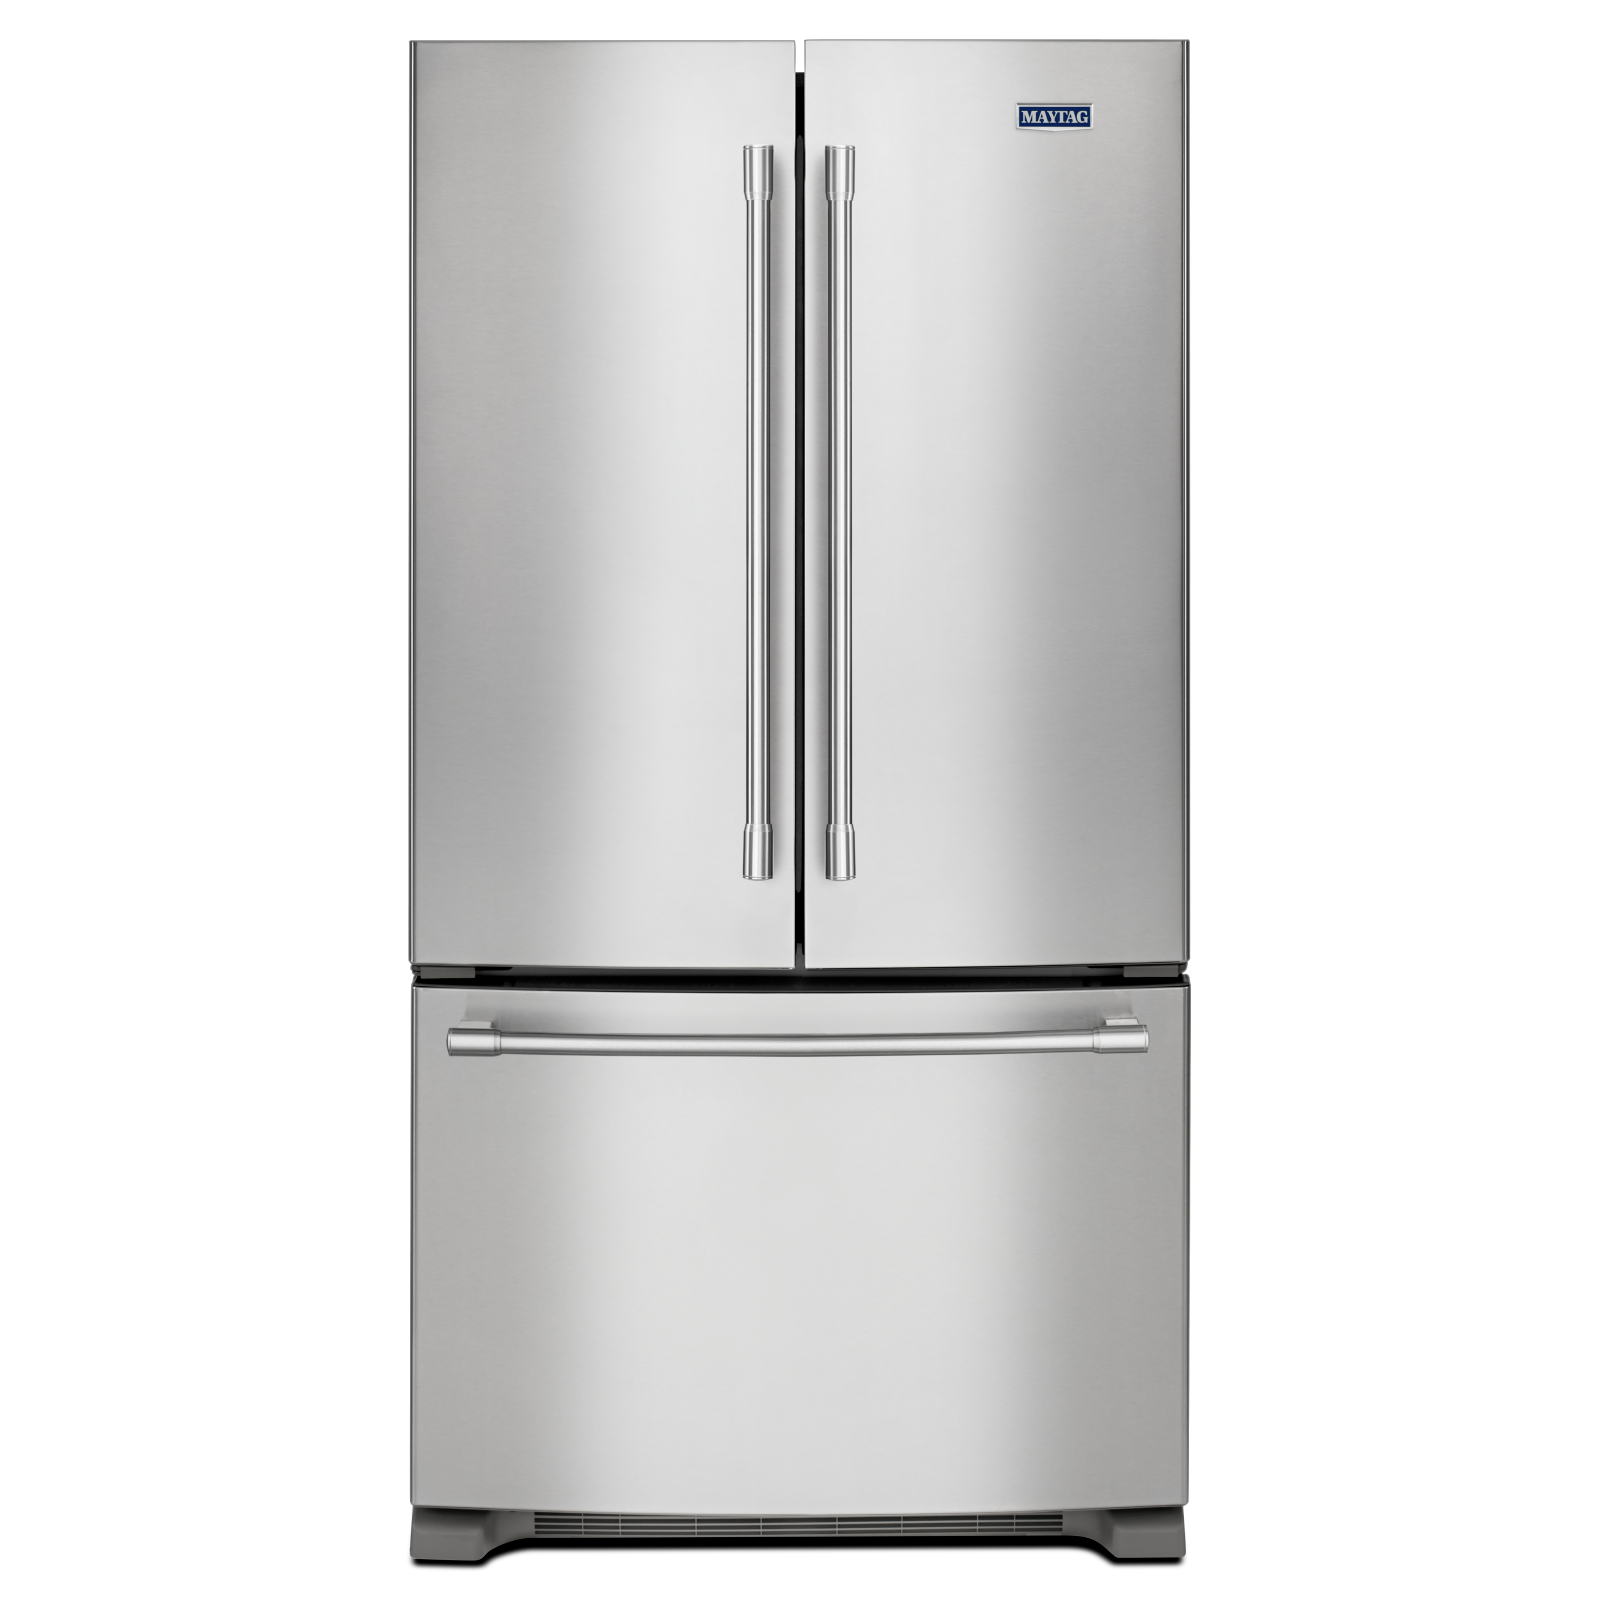 Maytag - 32.625 Inch 70.125 cu. ft French Door Refrigerator in Stainless - MRFF5033PZ